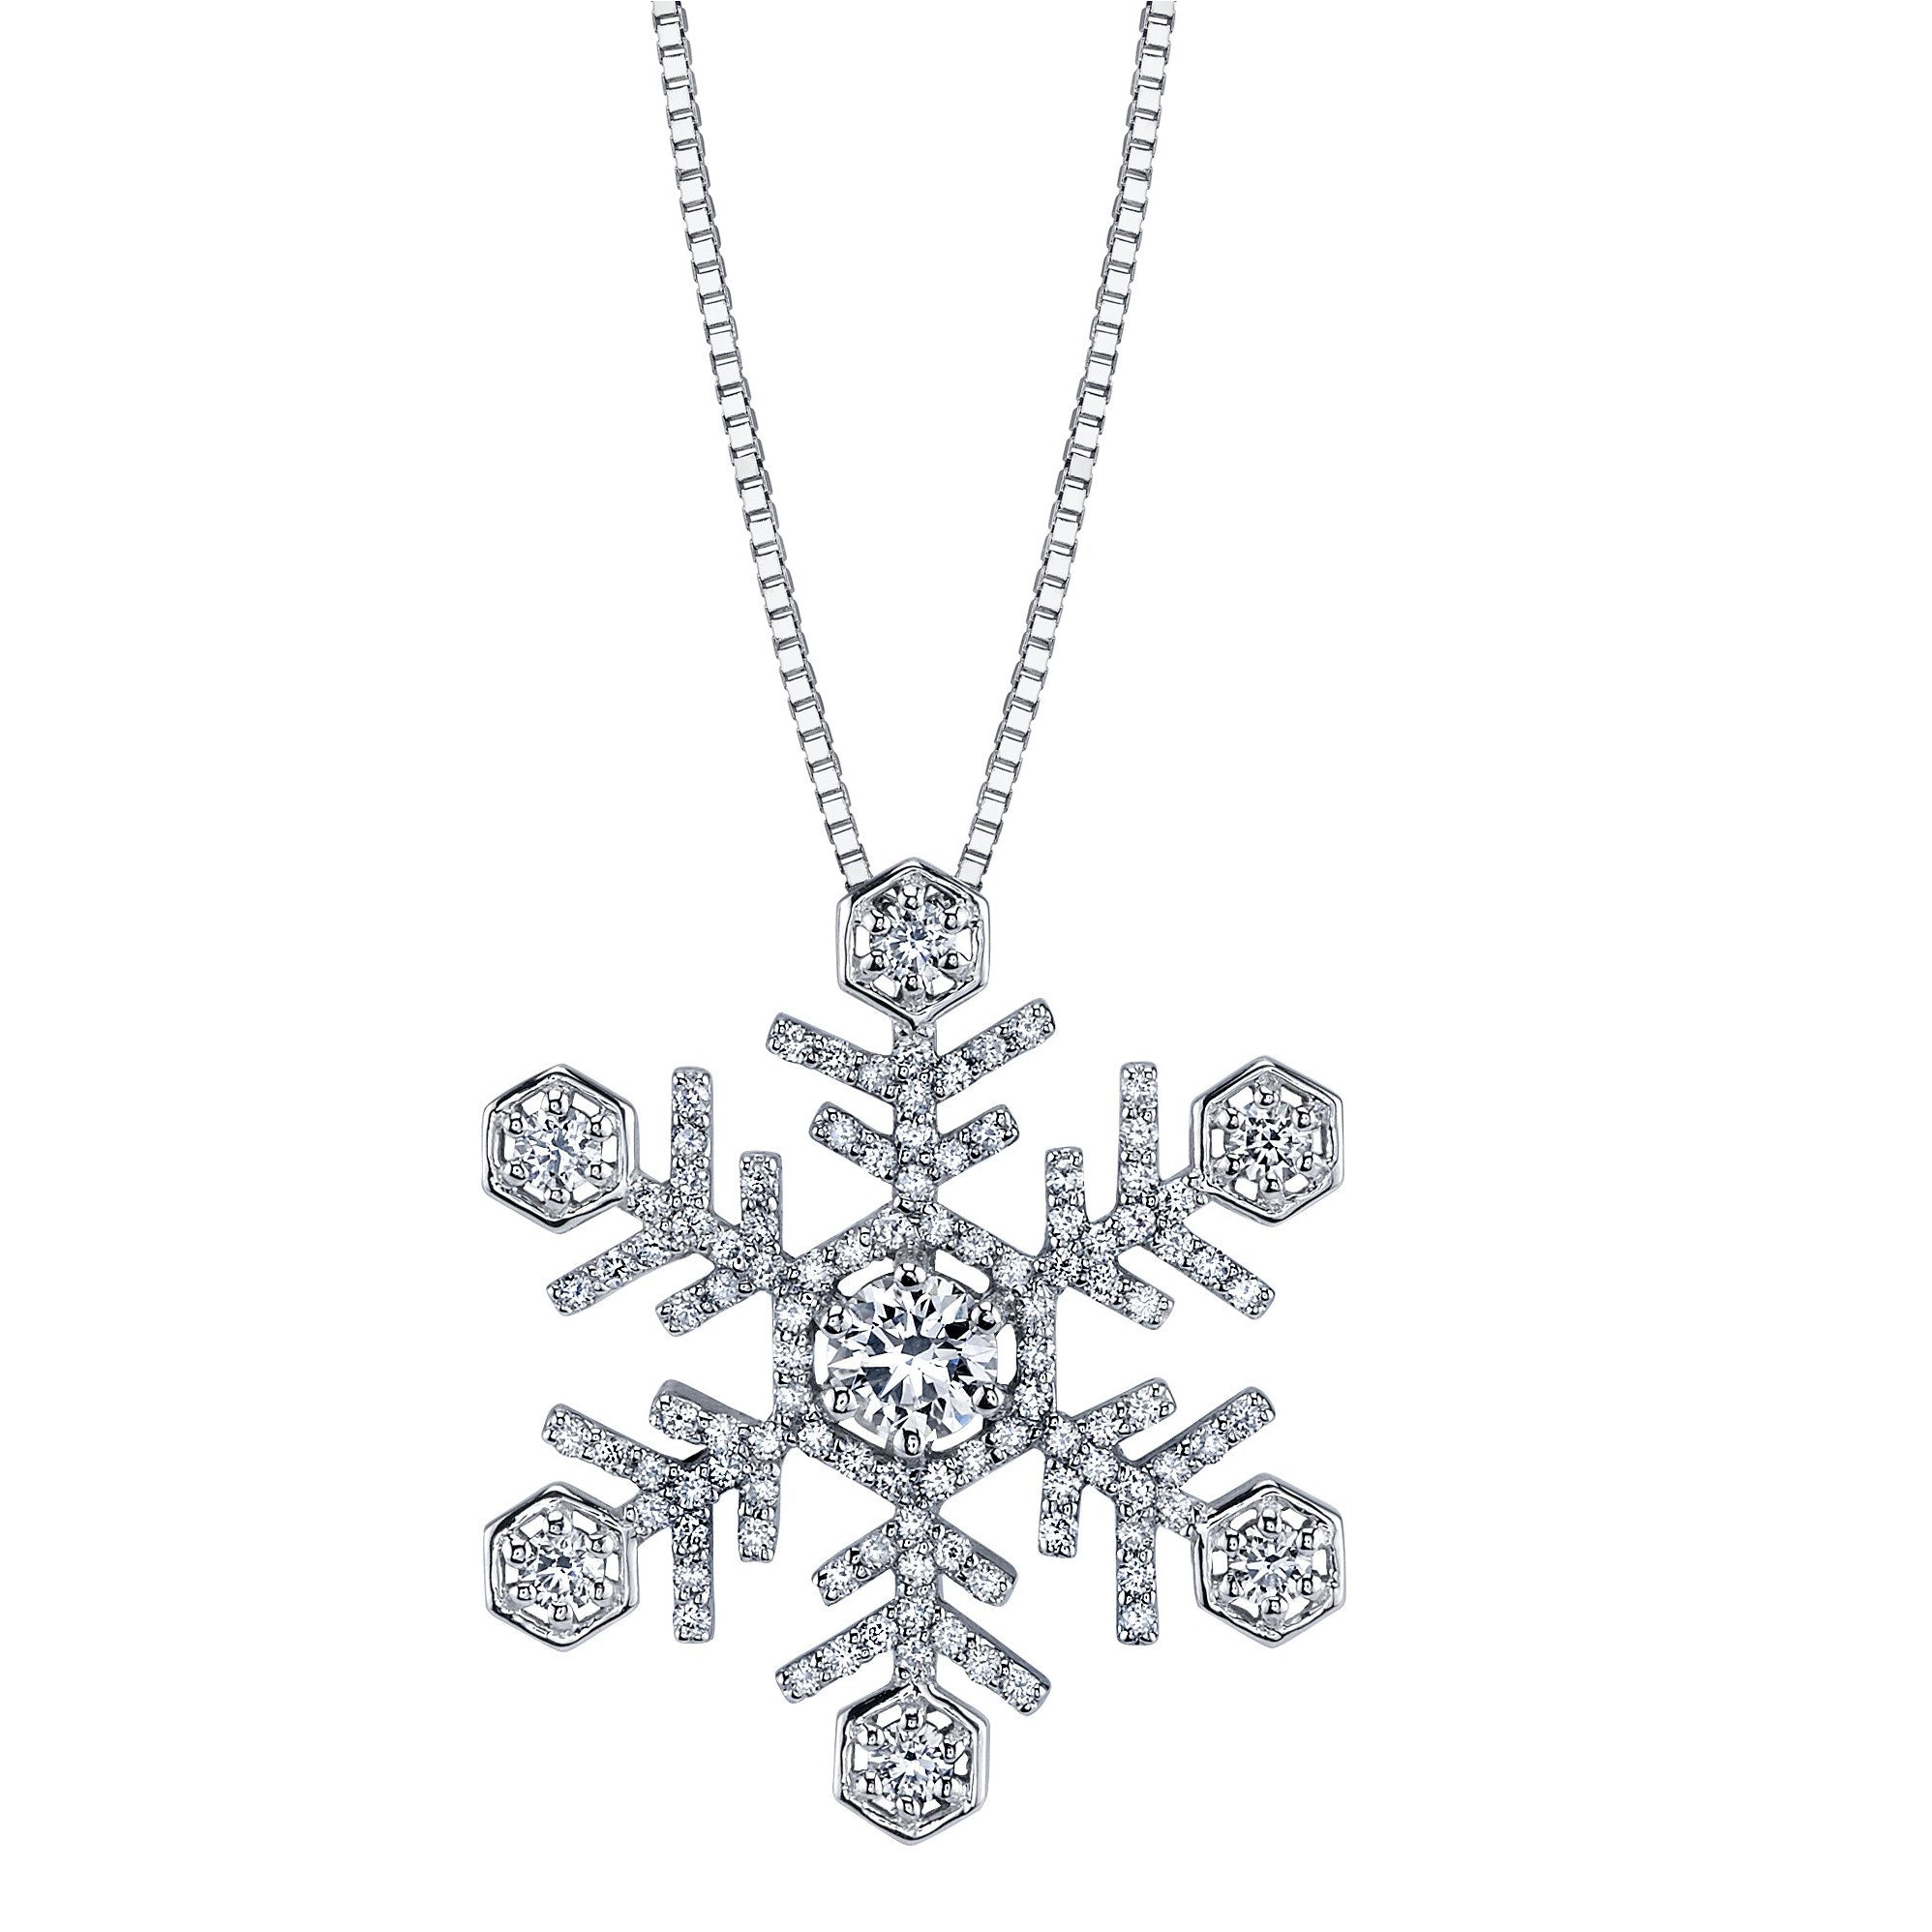 Snowflake pendant crafted in 14kt Canadian Certified Gold. This necklace is set with 0.70CTW of round brilliant-cut Canadian diamonds.